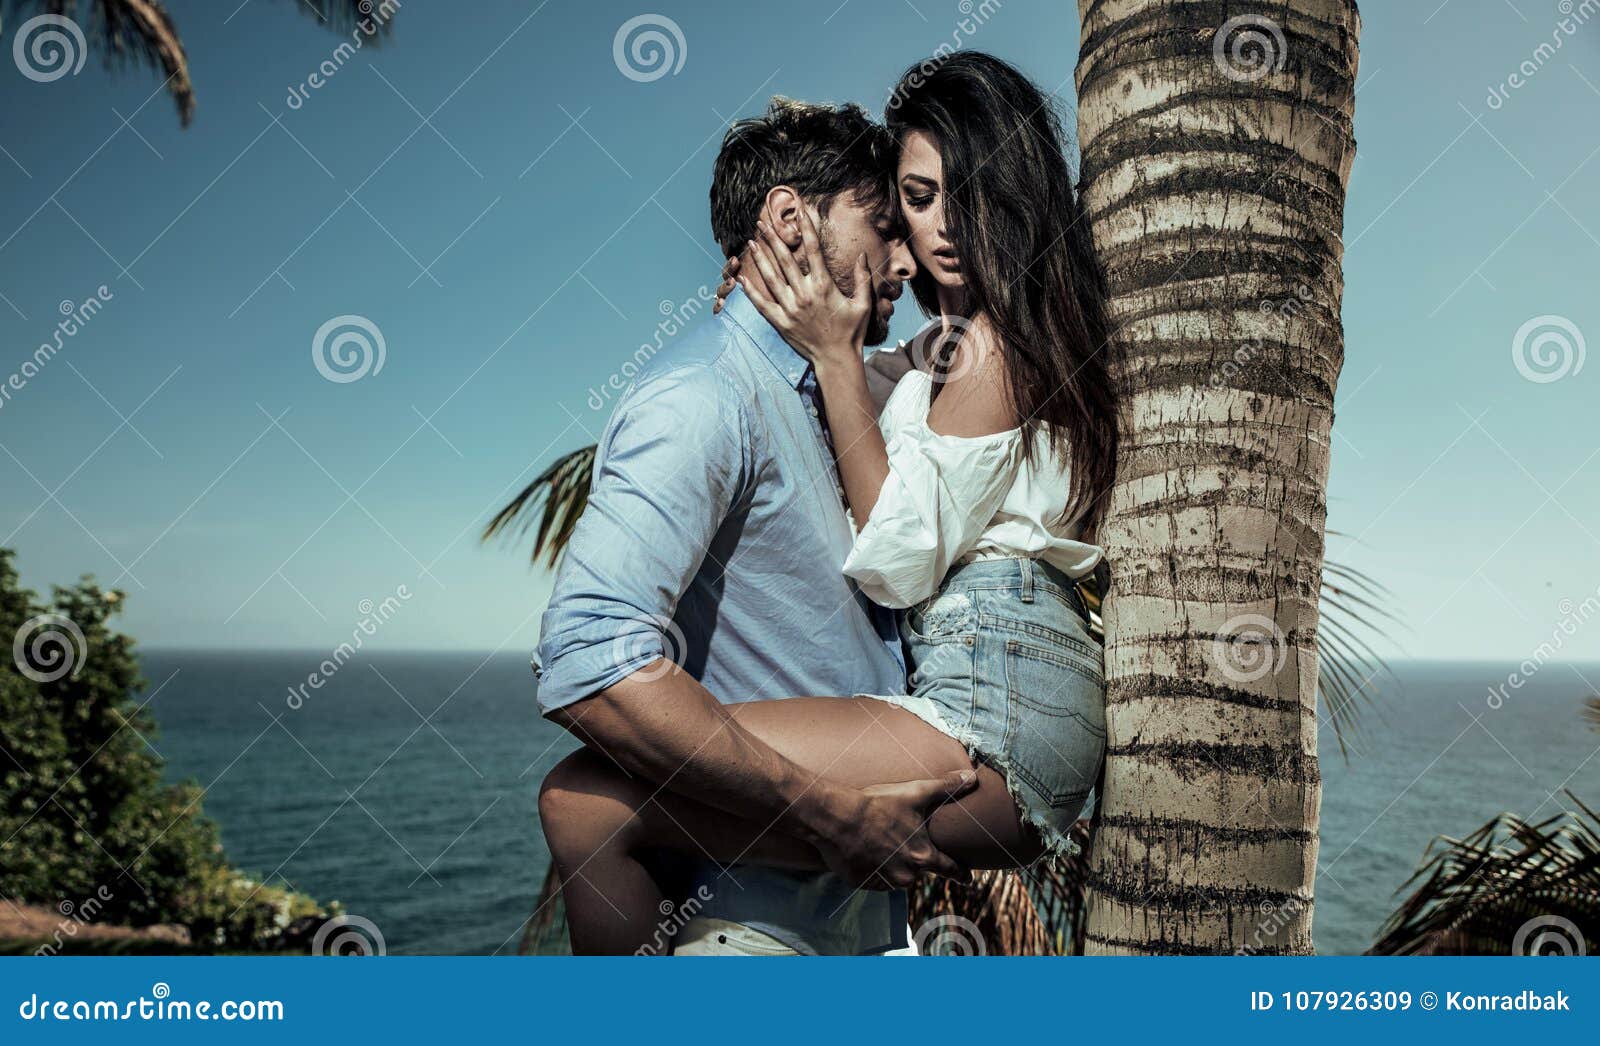 portrait of attractive lovers leaning on a palm tree